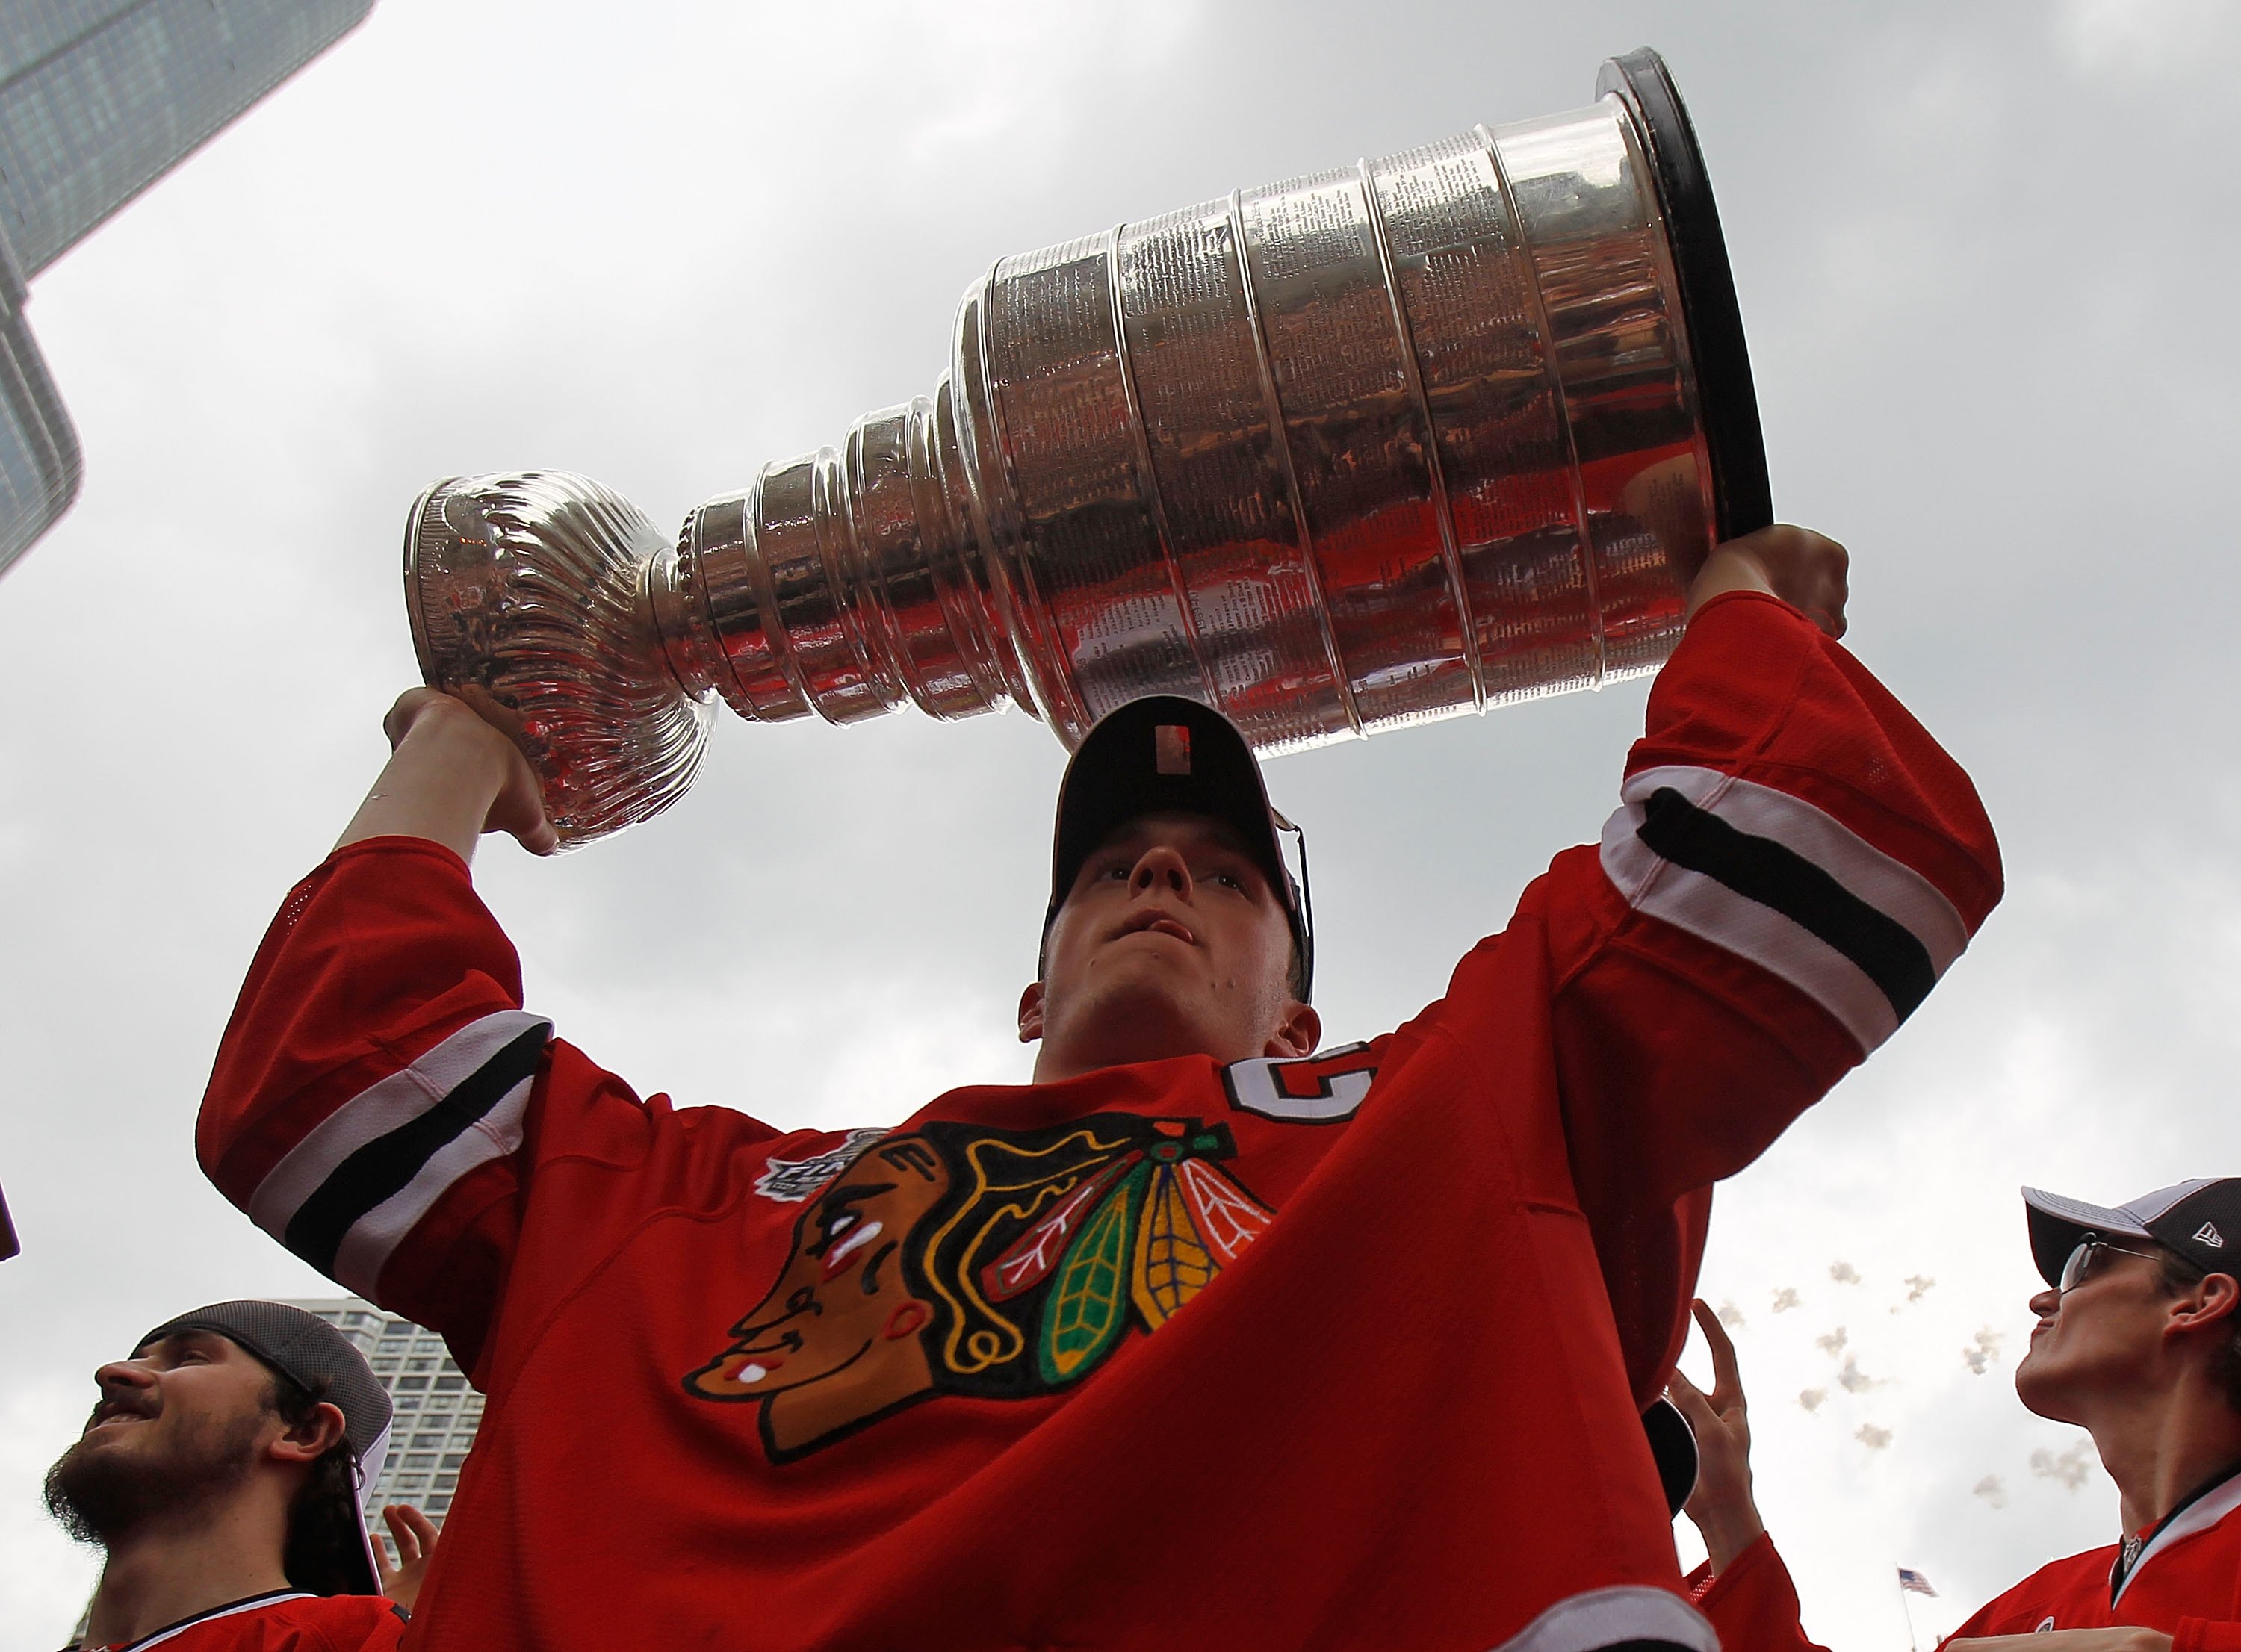 CHICAGO - JUNE 11: Jonathan Toews #19 hoists the cup during the Chicago Blackhawks Stanley Cup victory parade and rally on June 11, 2010 in Chicago, Illinois. (Photo by Jonathan Daniel/Getty Images)